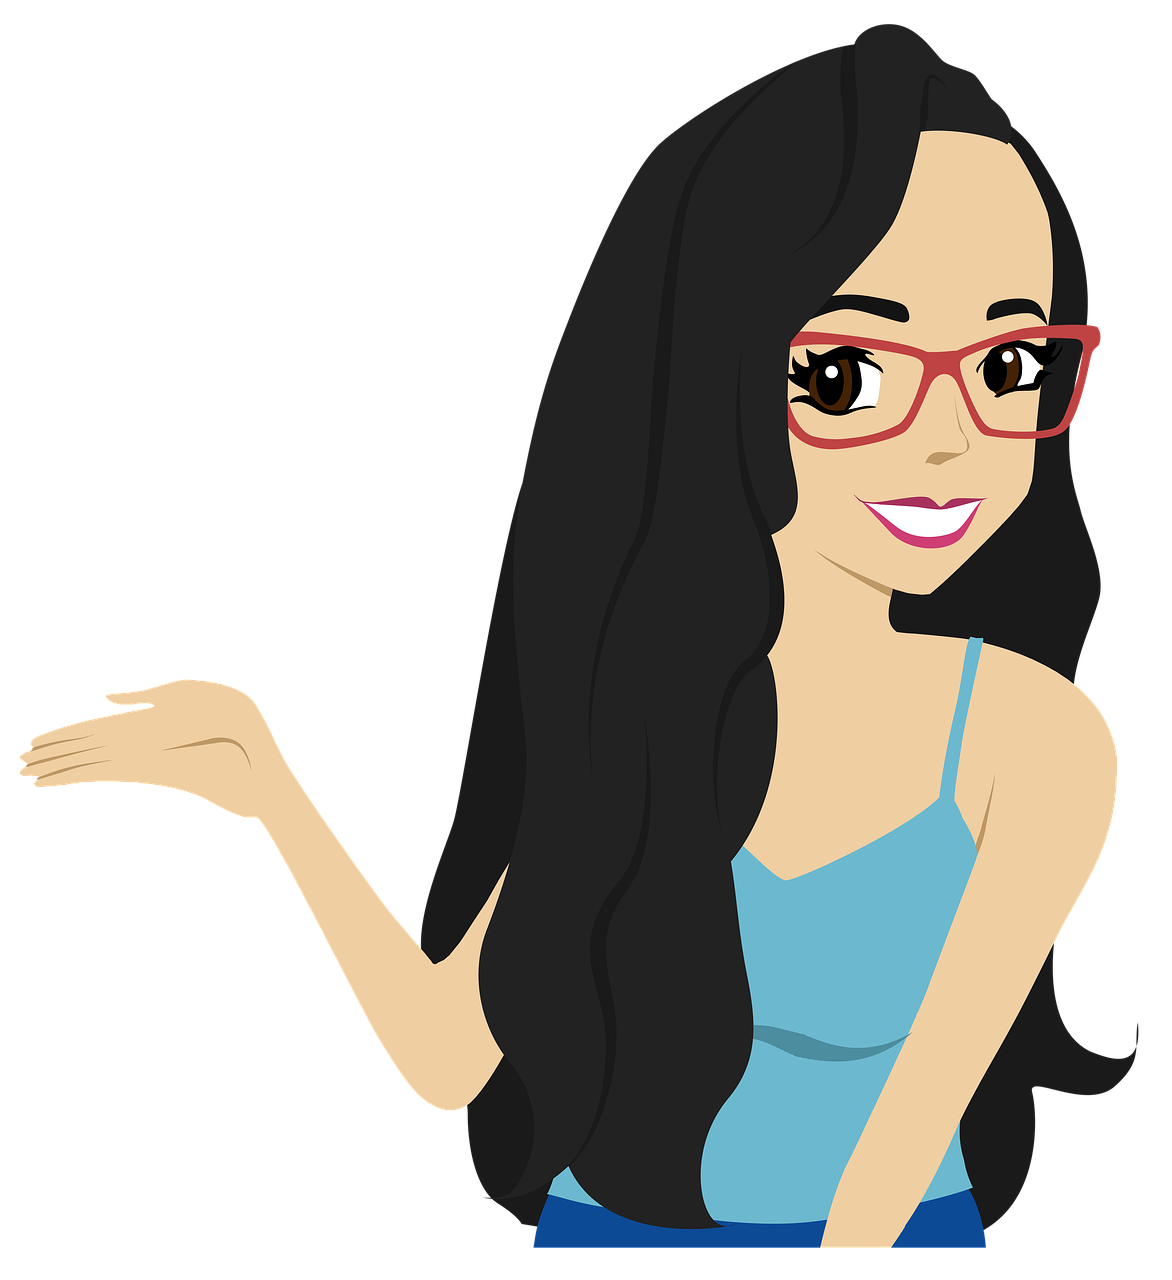 a woman with glasses holding out her hand, an illustration of, inspired by helen huang, shutterstock, long free black straight hair, cartoon style illustration, on a flat color black background, wikihow illustration